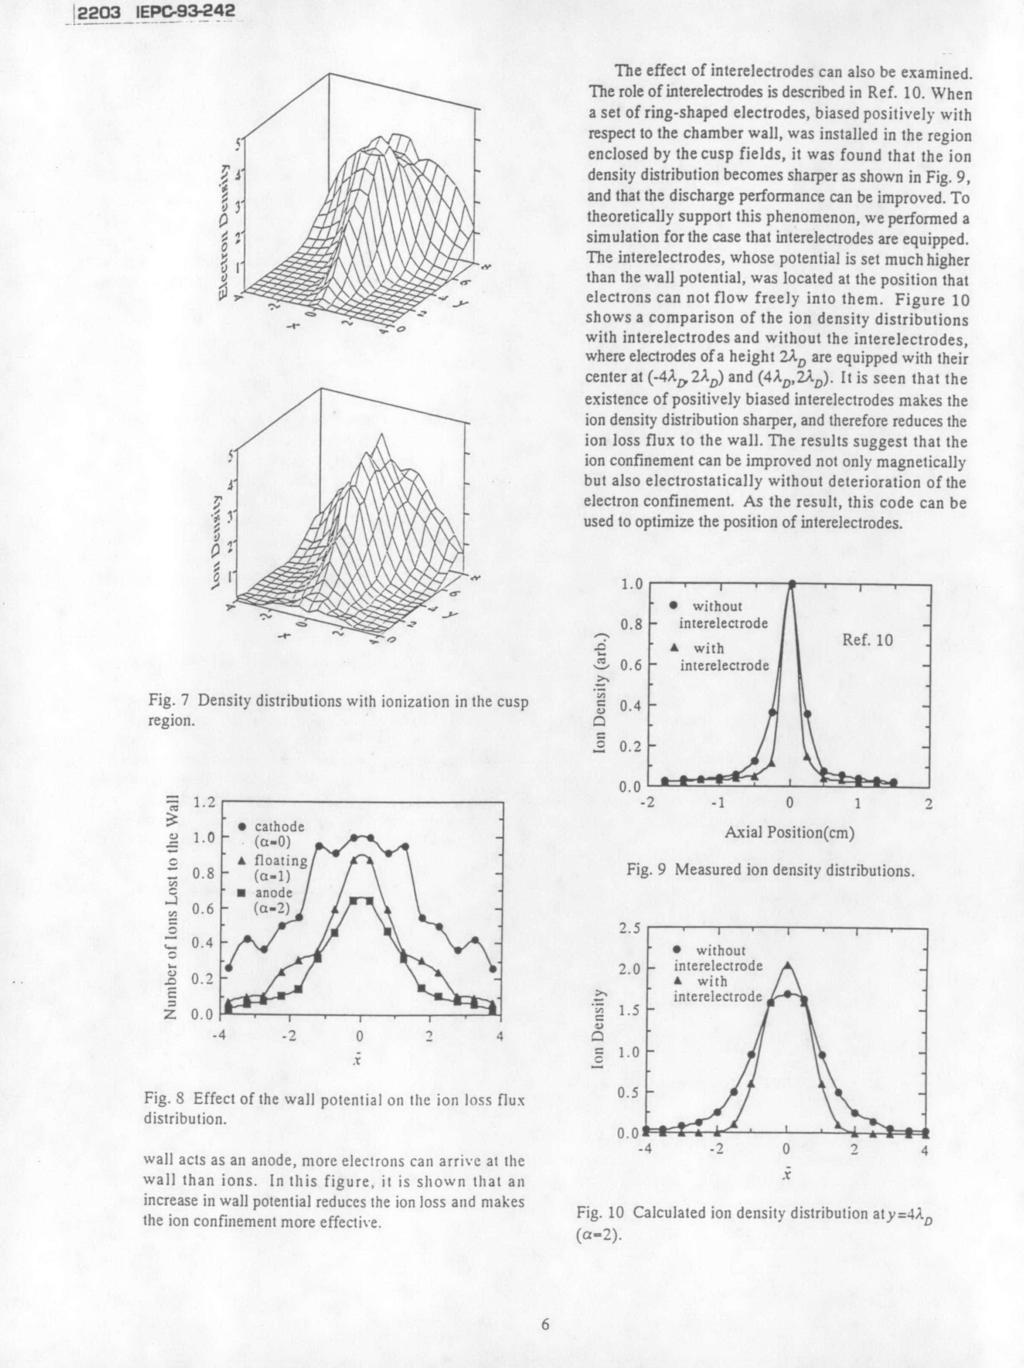 12203 IEPC-93-242 The effect of interelectrodes can also be examined. The role of interelectrodes is described in Ref. 10.